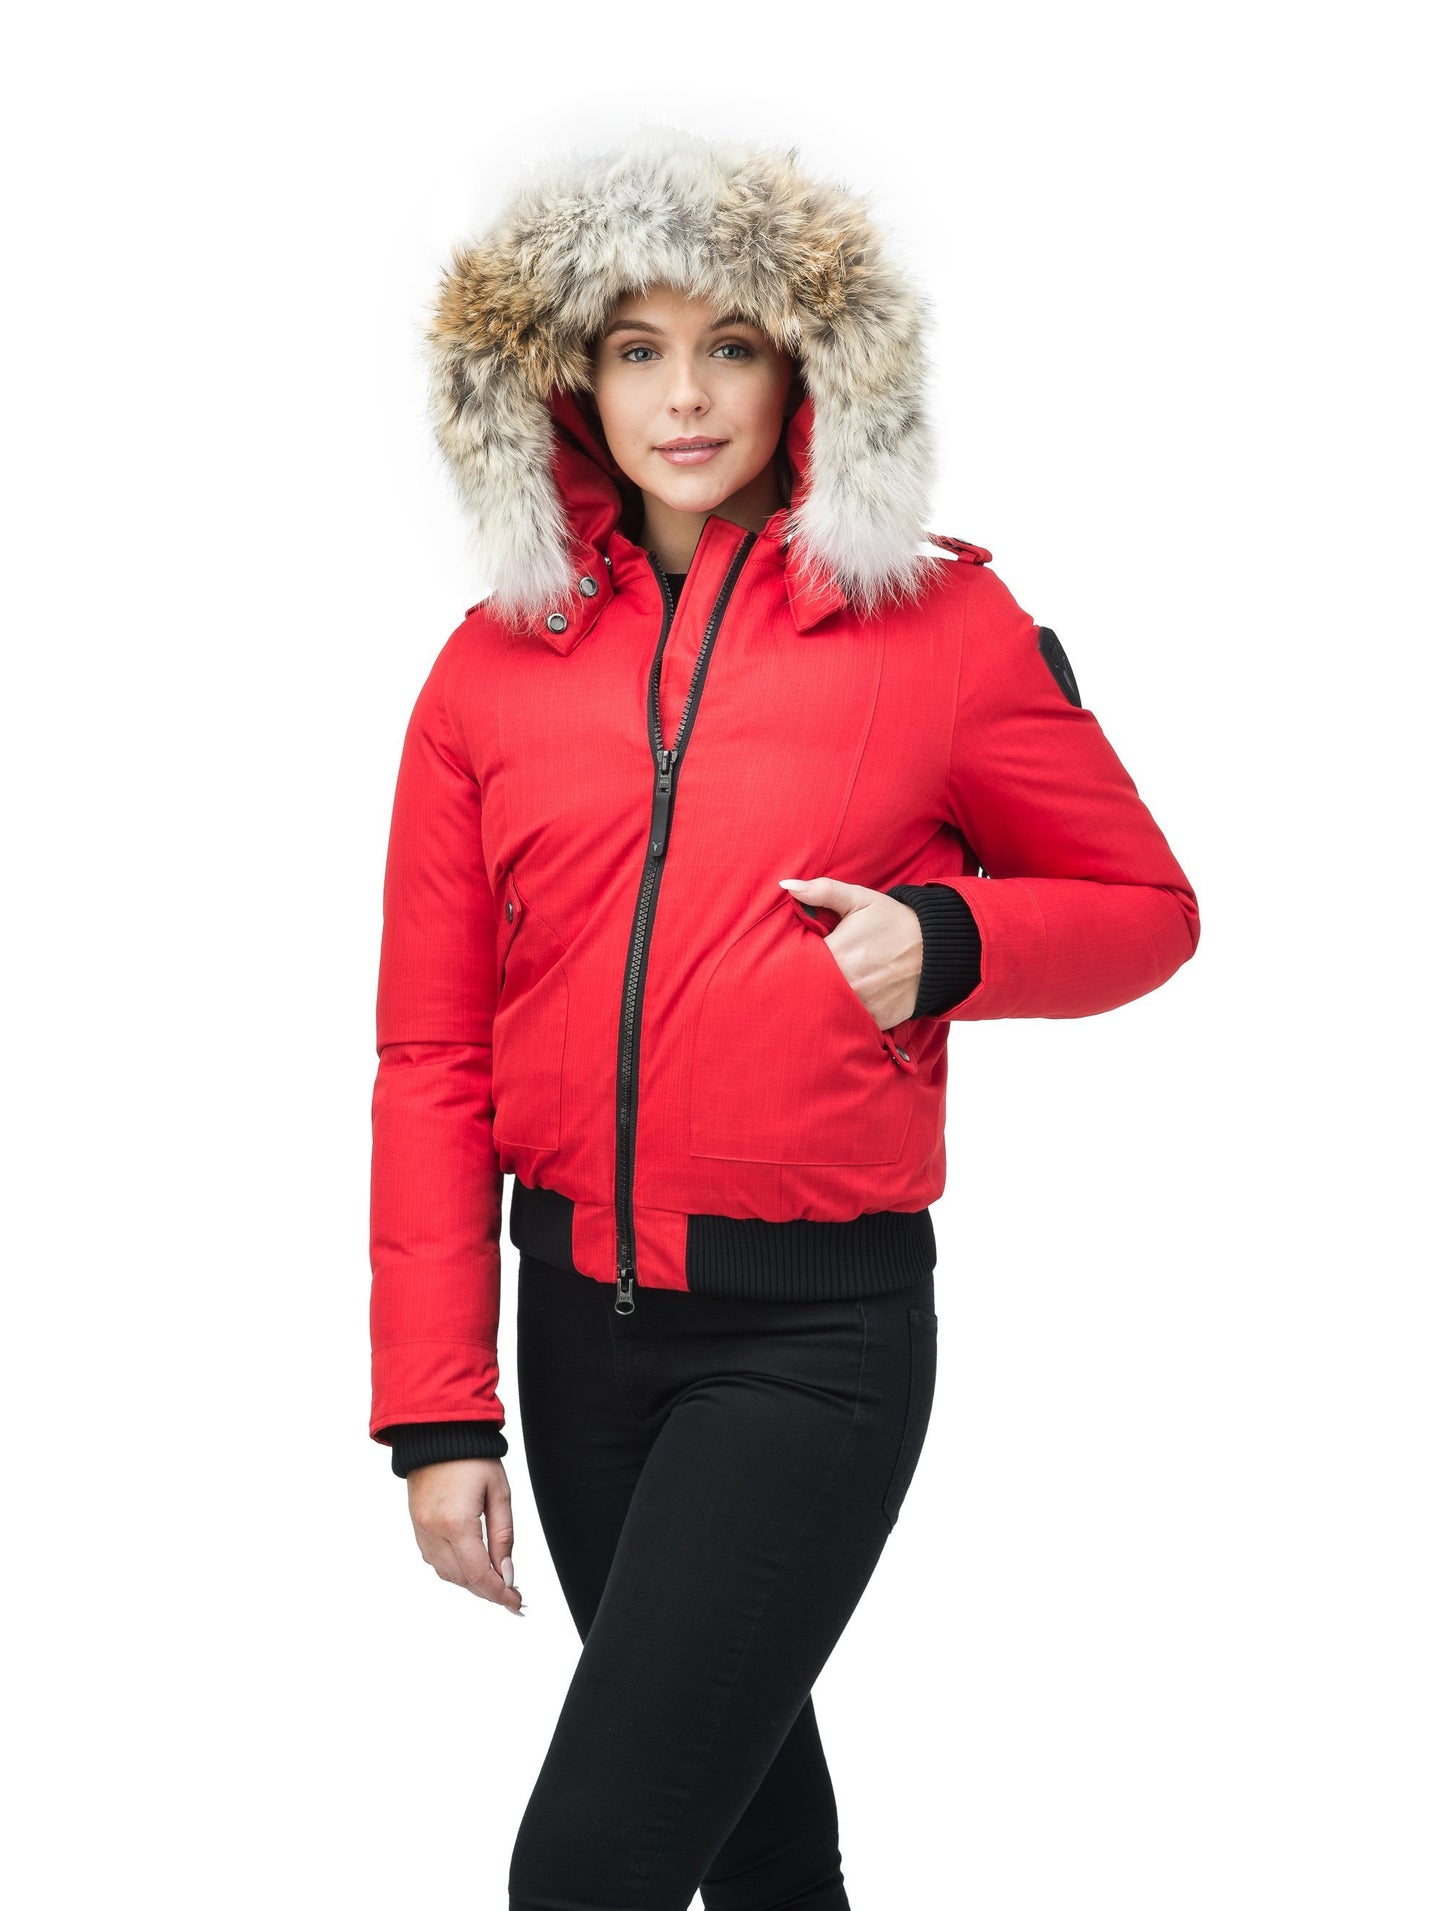 Women's bomber style down filled jacket with a removable hood and fur trim in CH Red